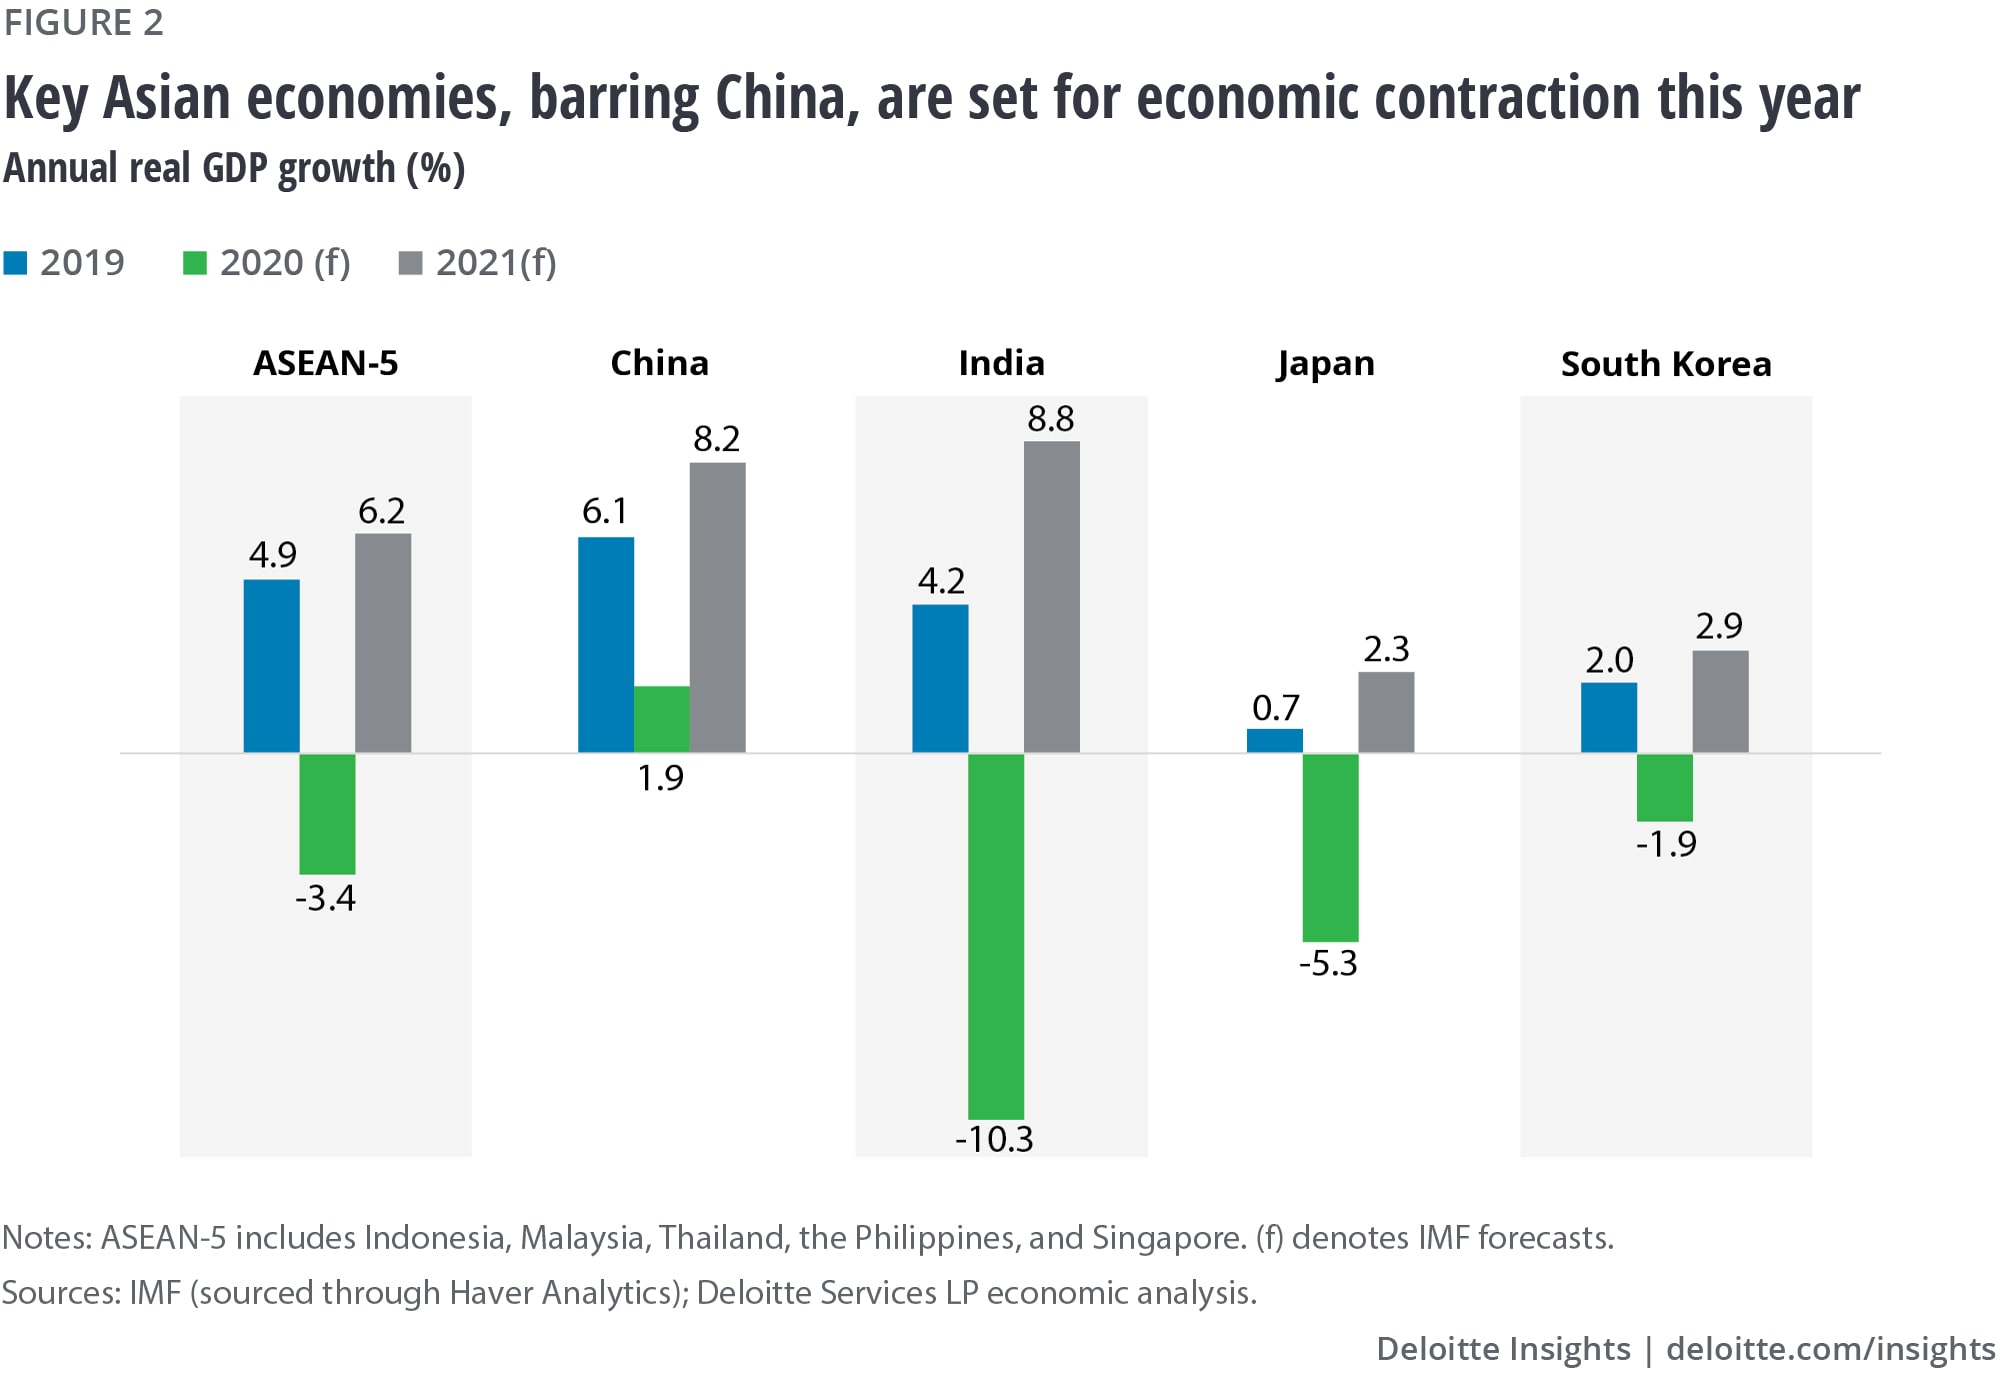 Key Asian economies, barring China, are set for economic contraction this year